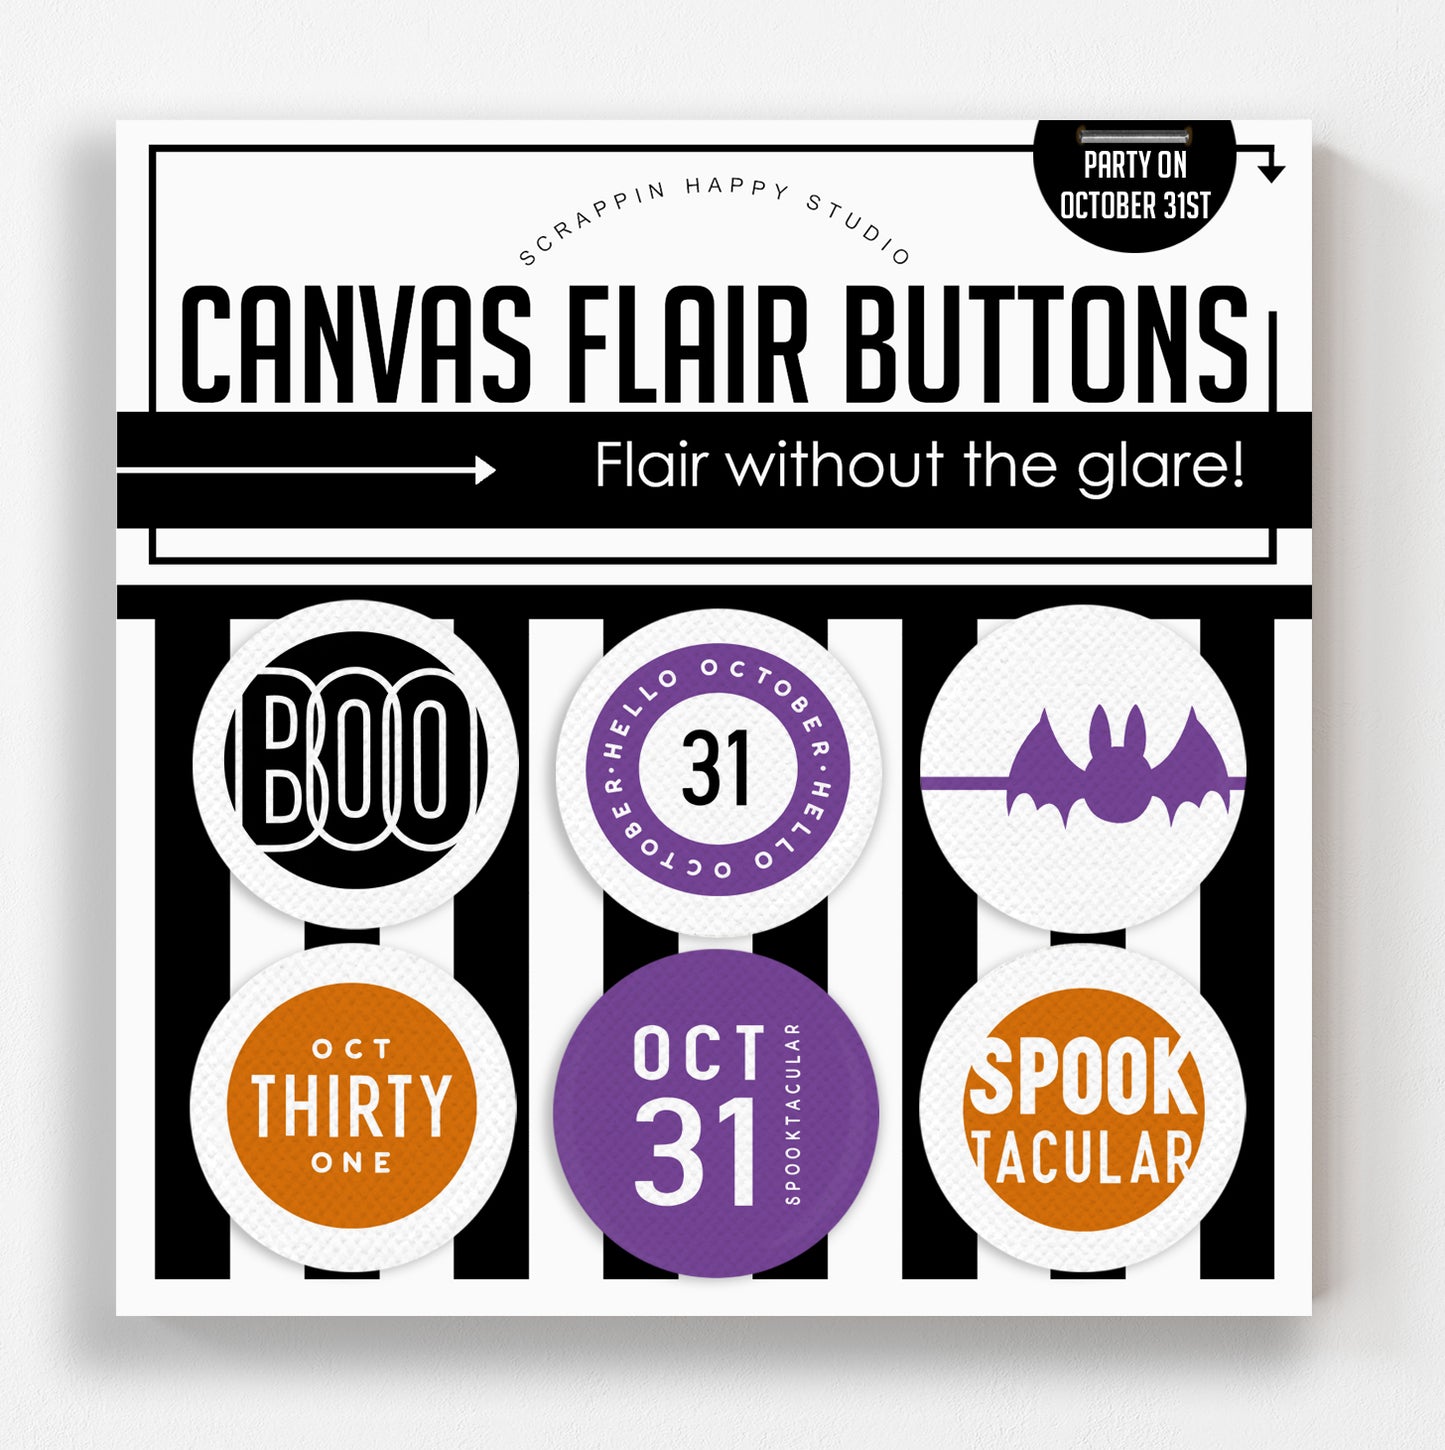 Party On October 31st Canvas Flair